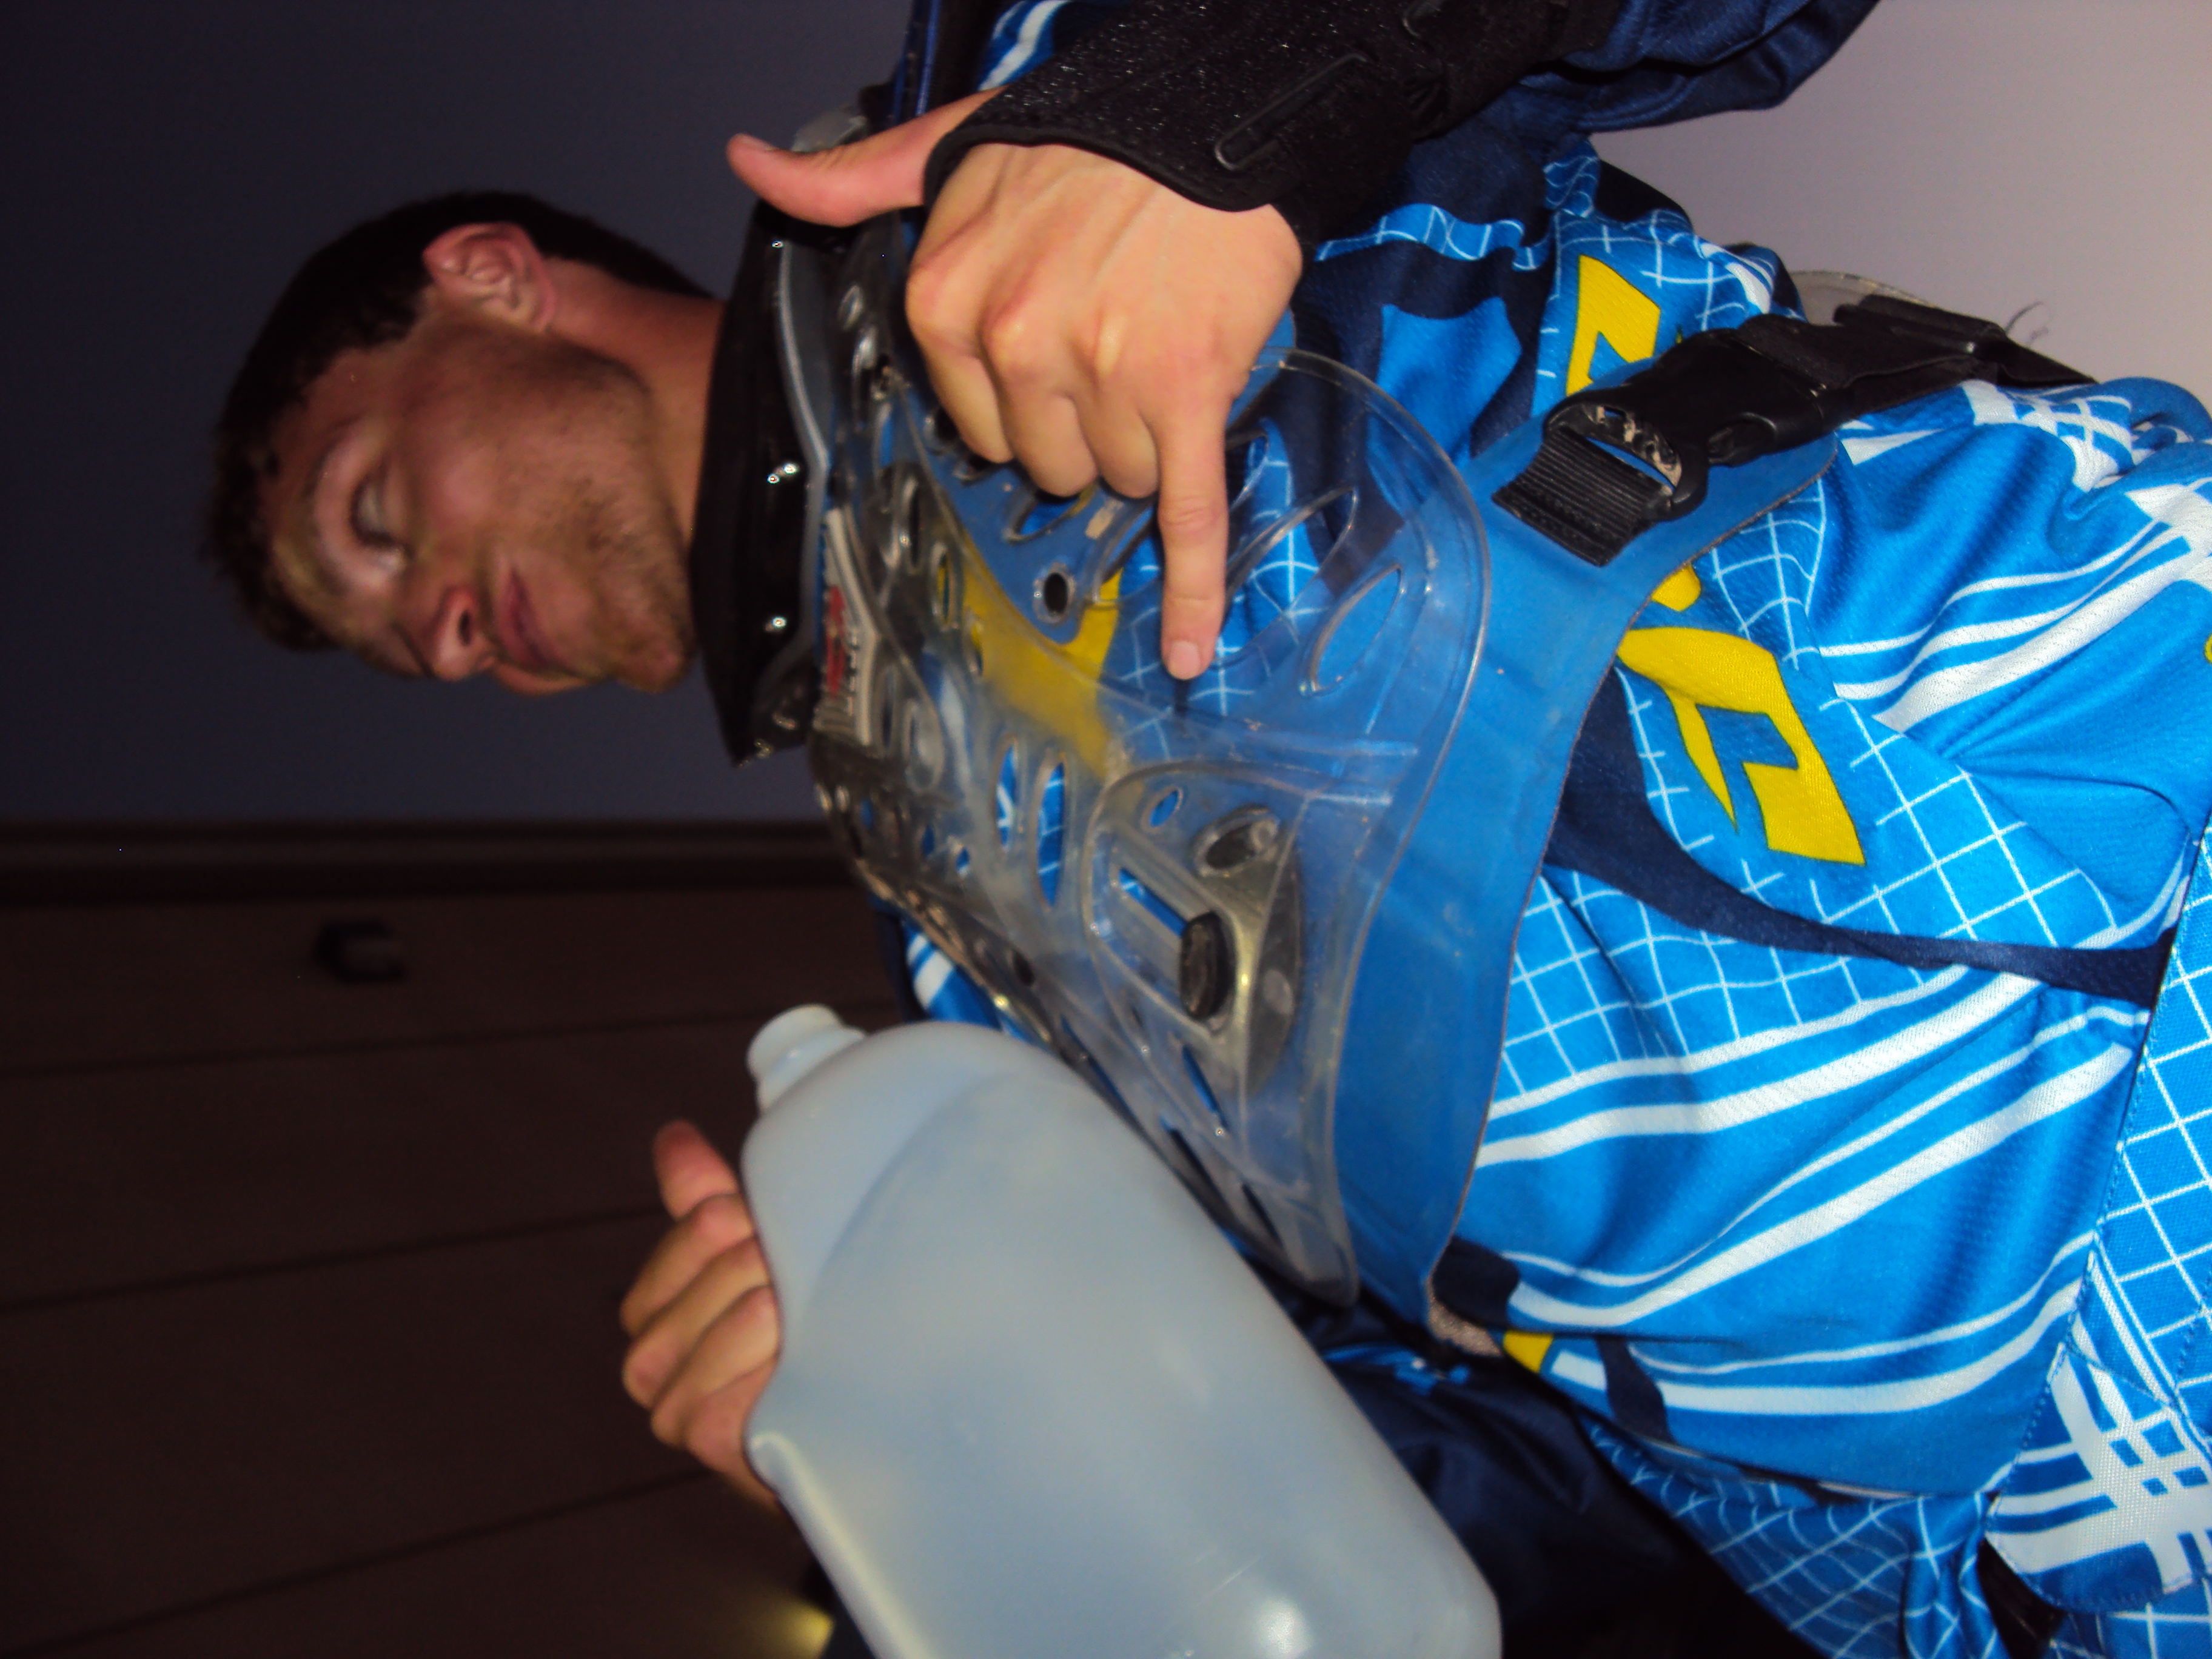 Water, check. New One Gear, Check. Wrist Brace, Check. Hang Loose.